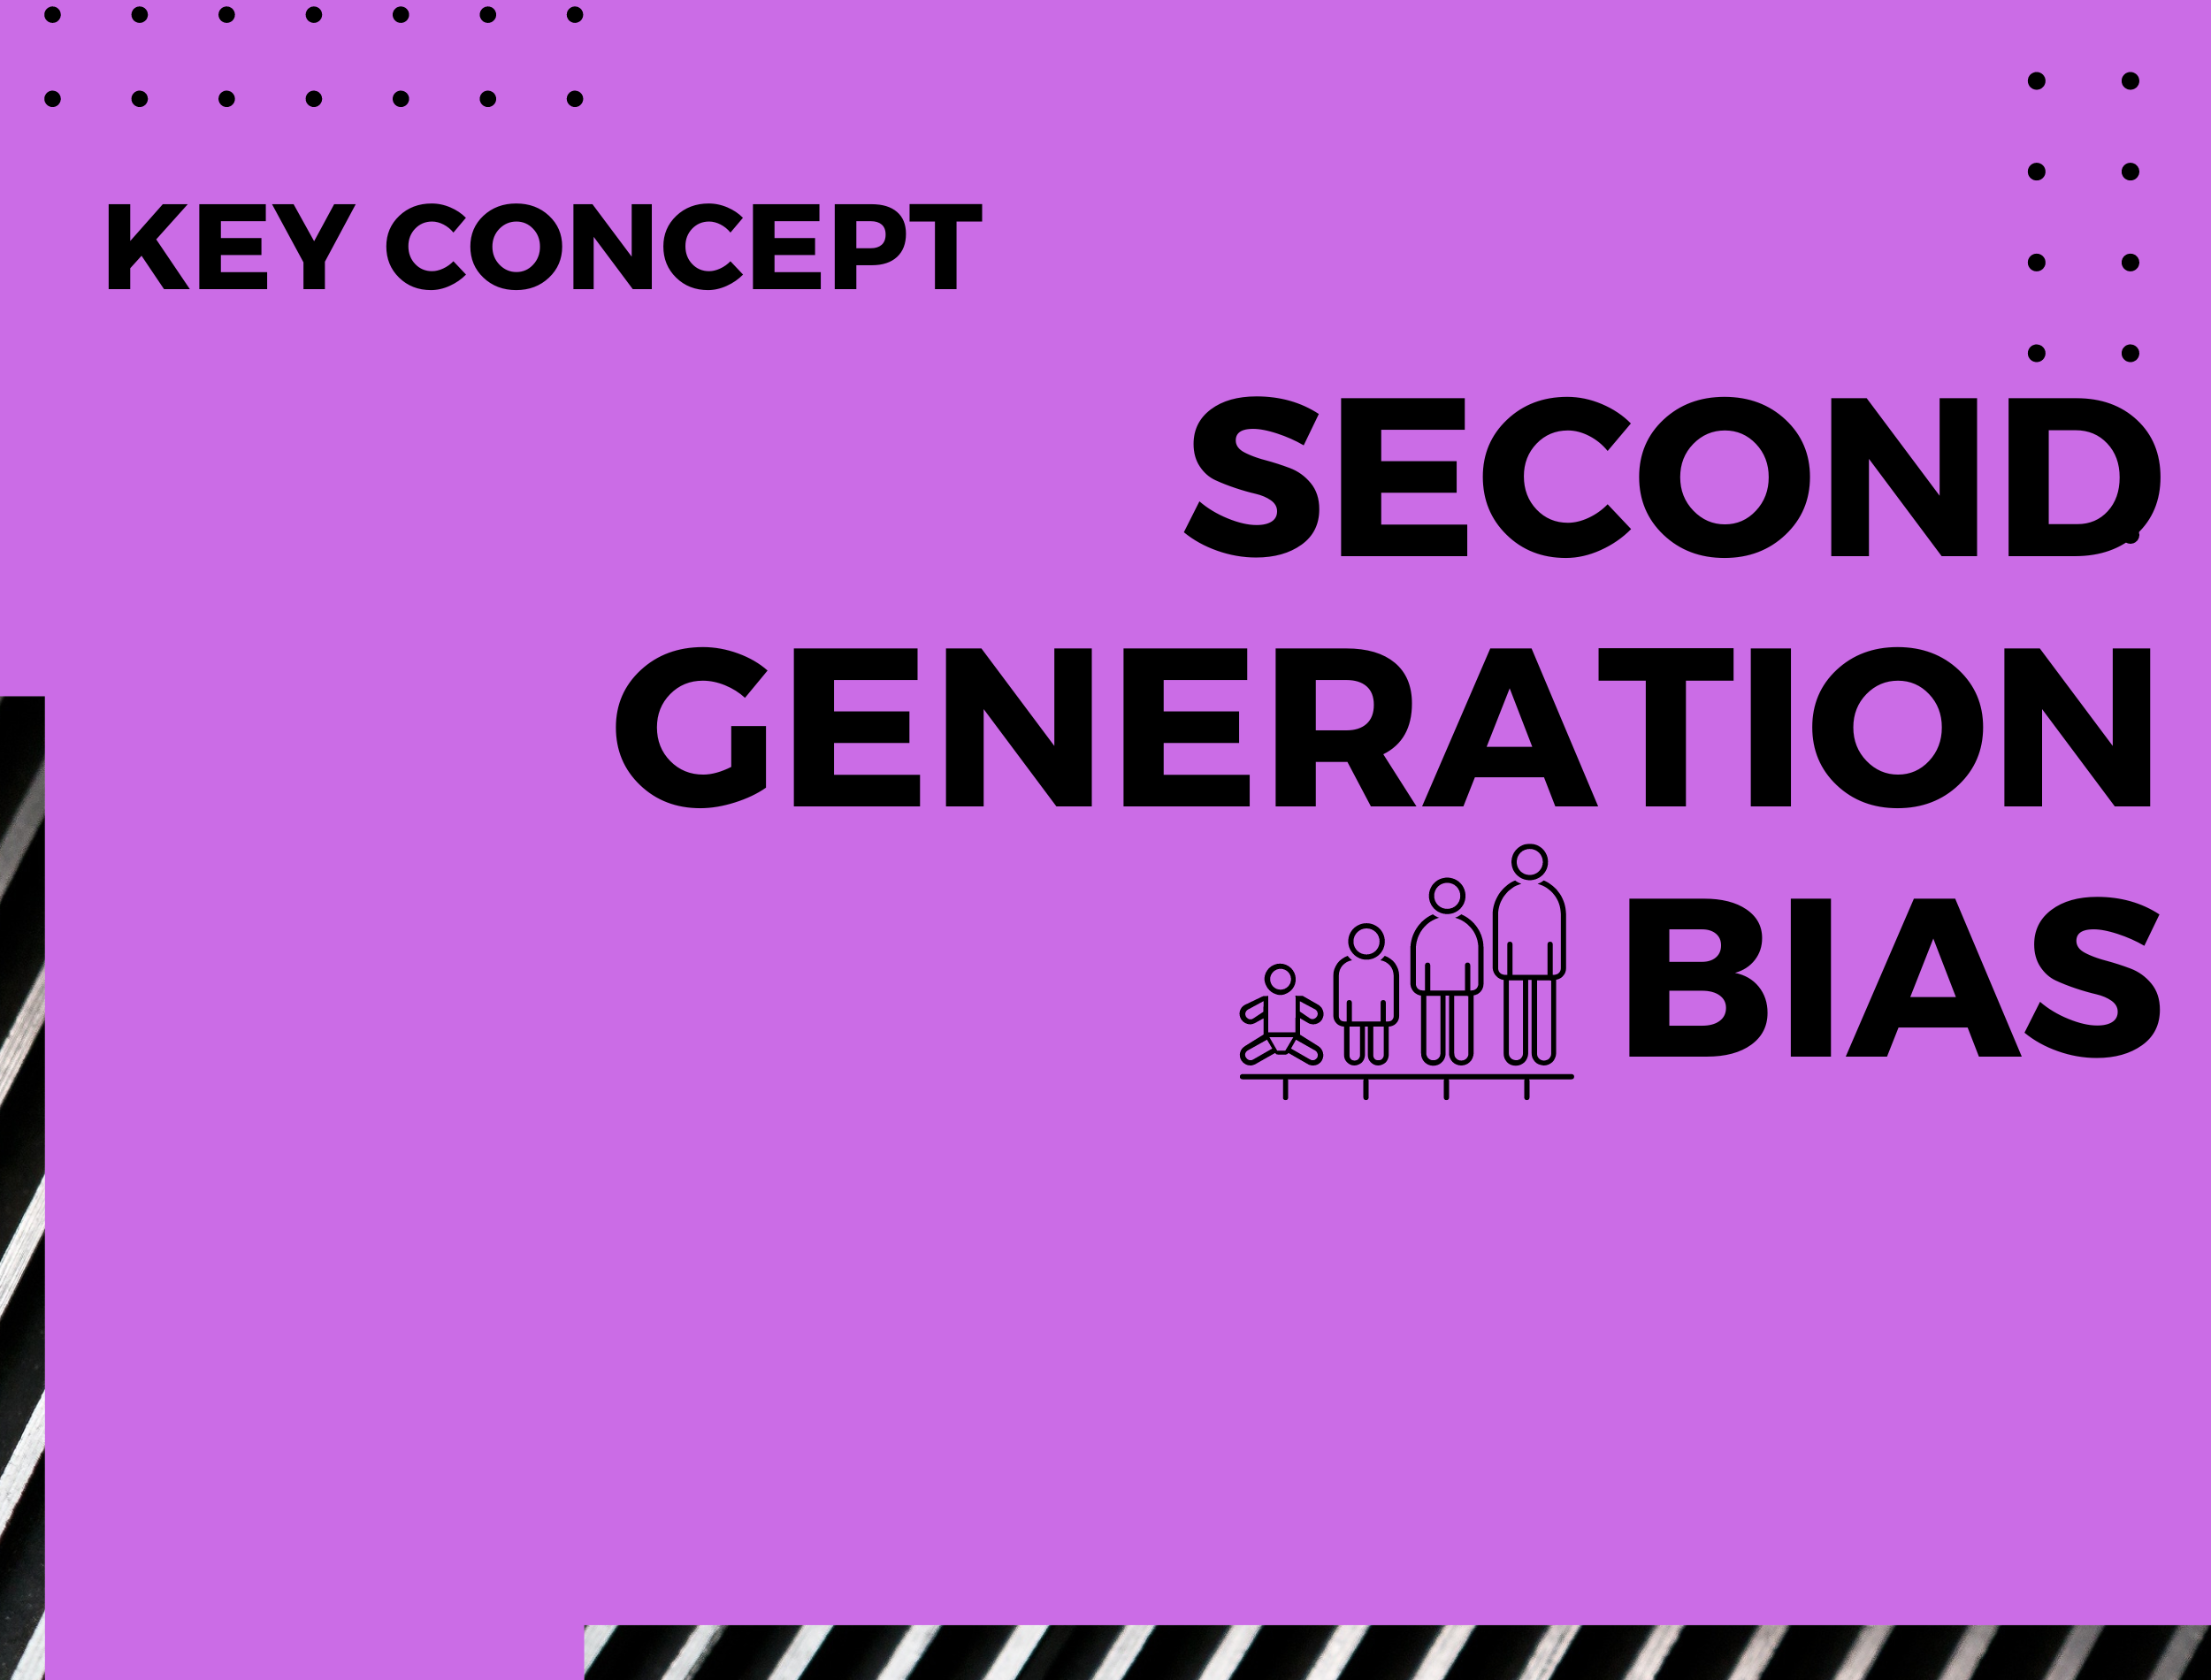 A graphic for the definition of second generation bias